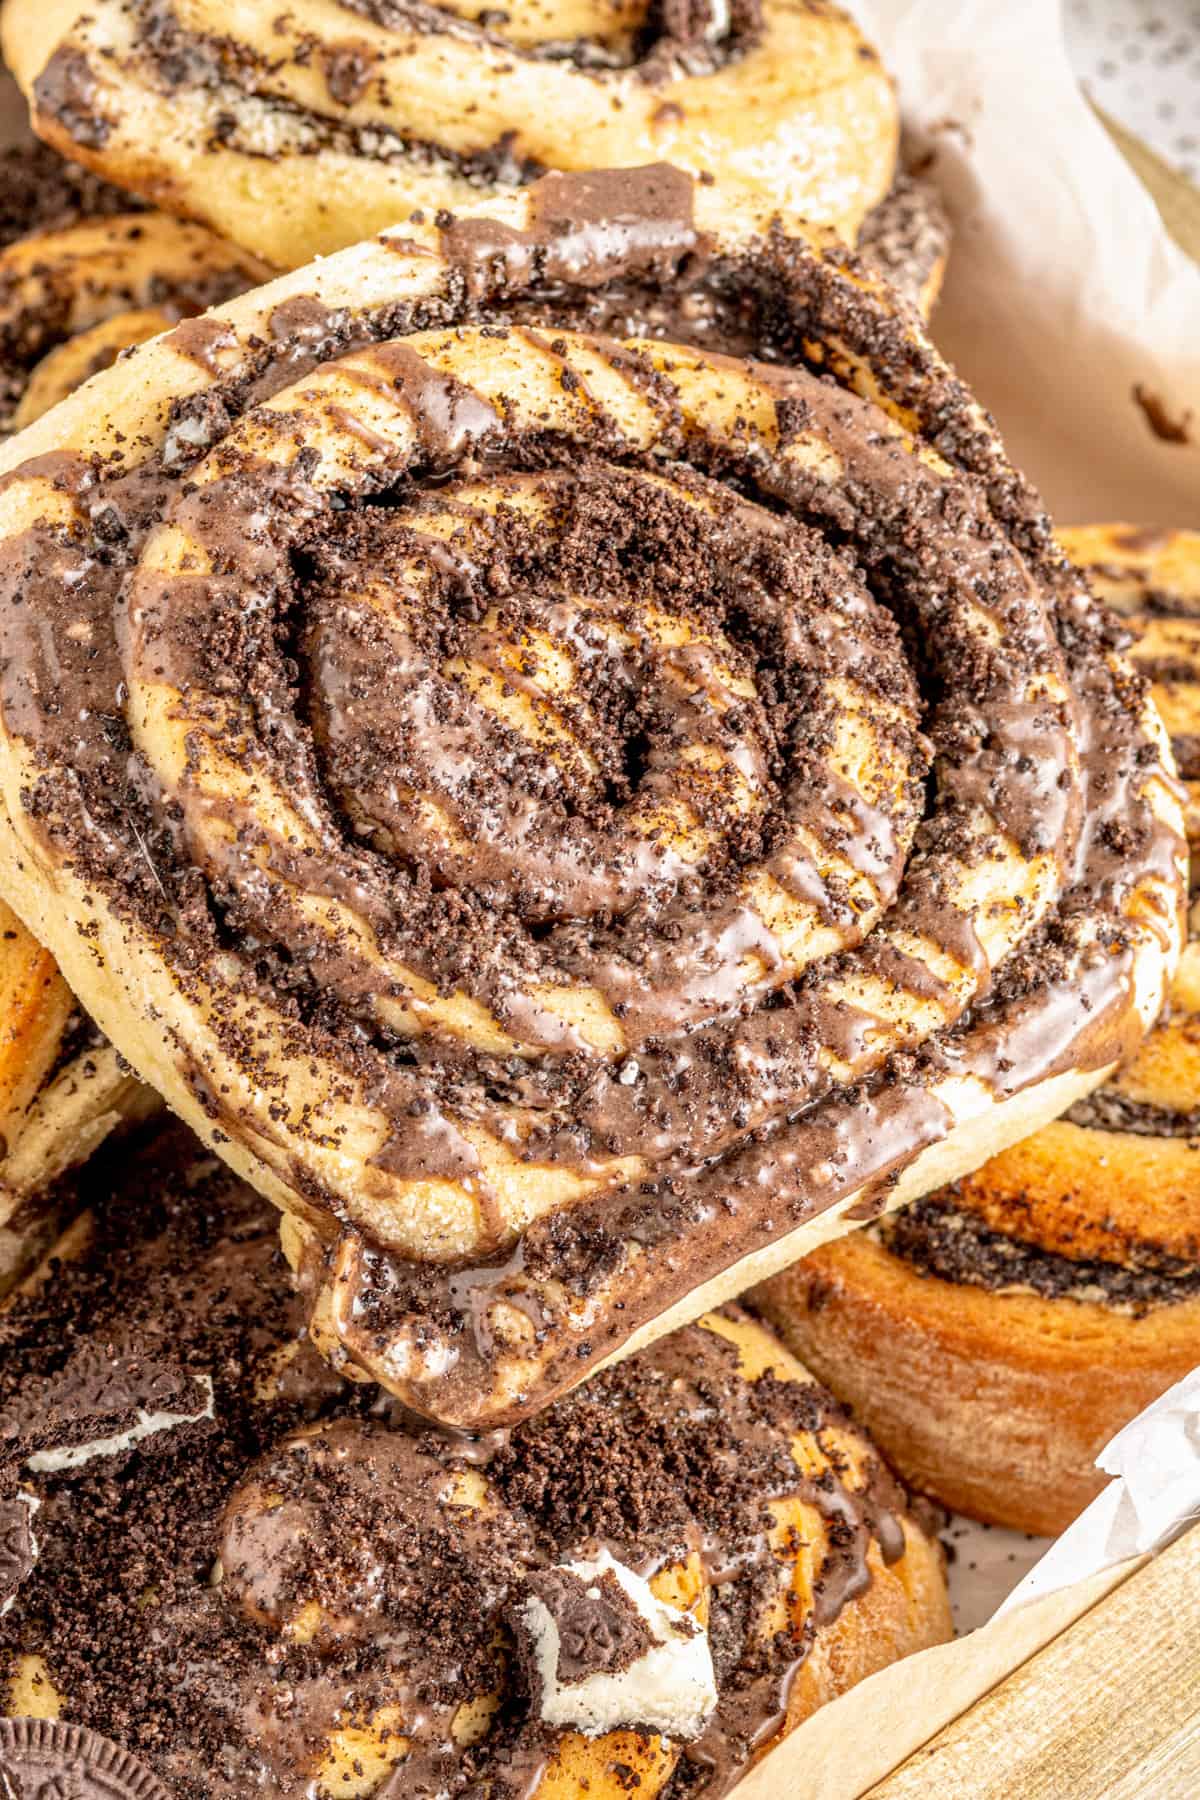 Cookies and cream cinnamon roll topped with glaze and crushed oreo cookies.